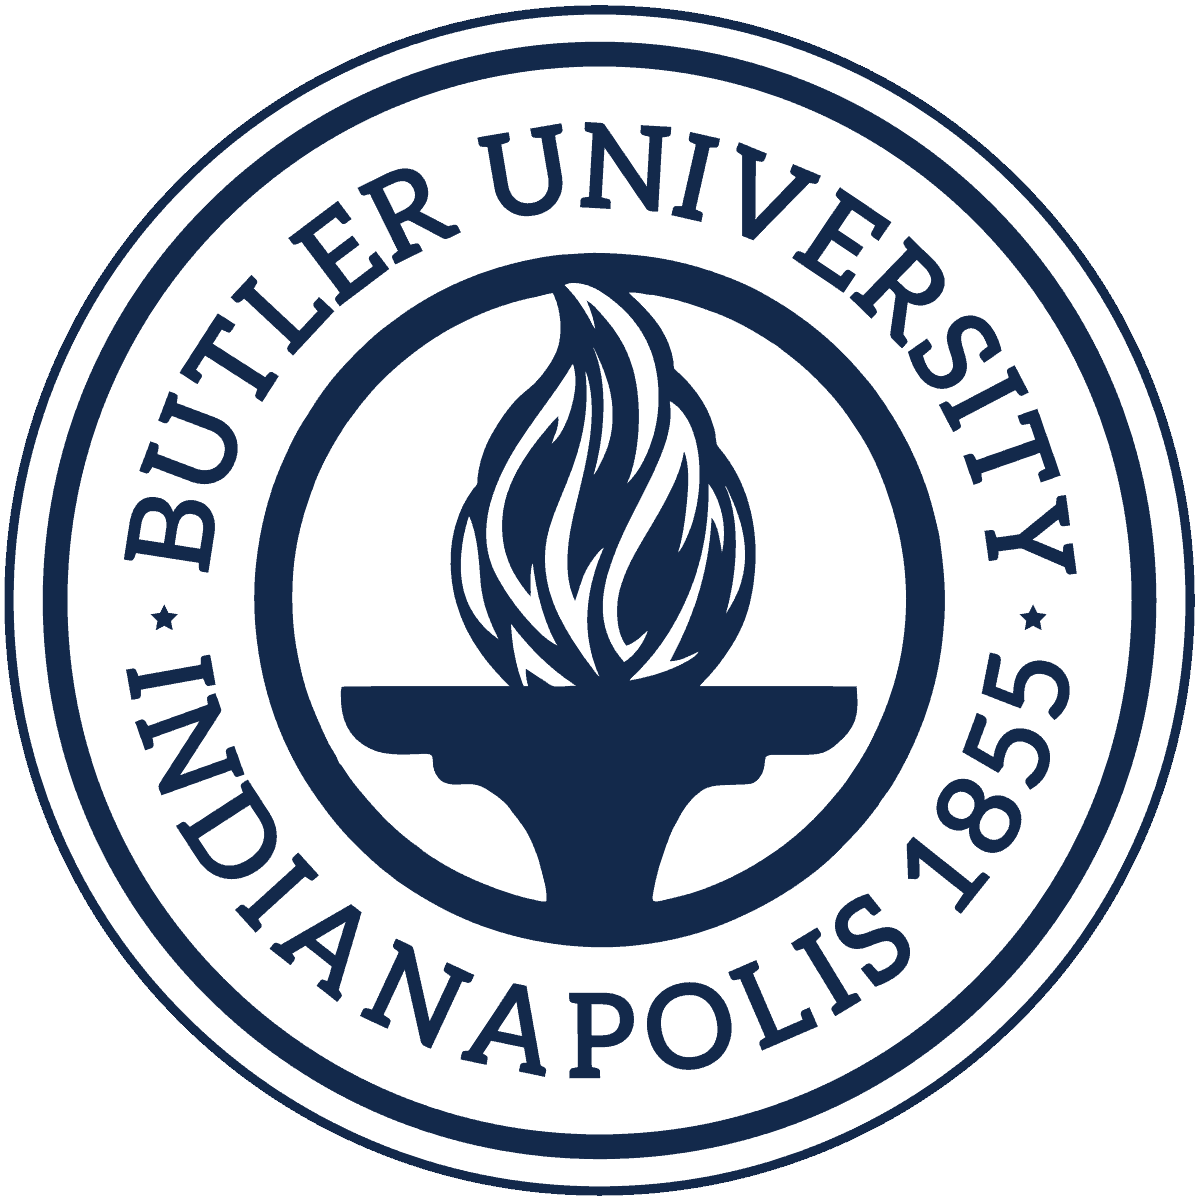 Butler University Alumni learned data science - Data science bootcamp attendee